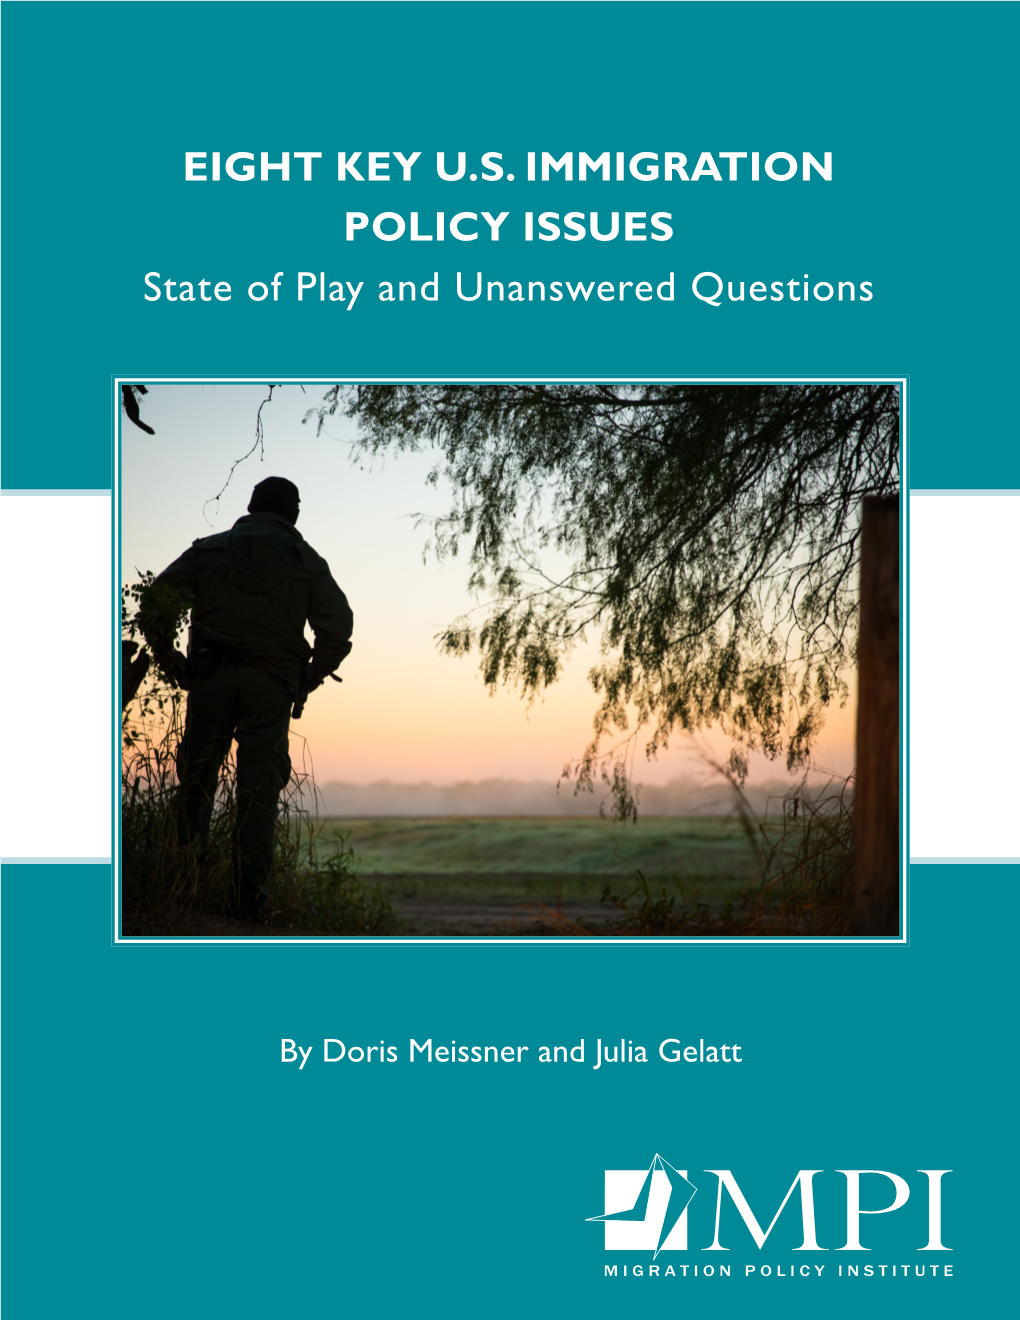 Eight Key U.S. Immigration Policy Issues: State of Play and Unanswered Questions